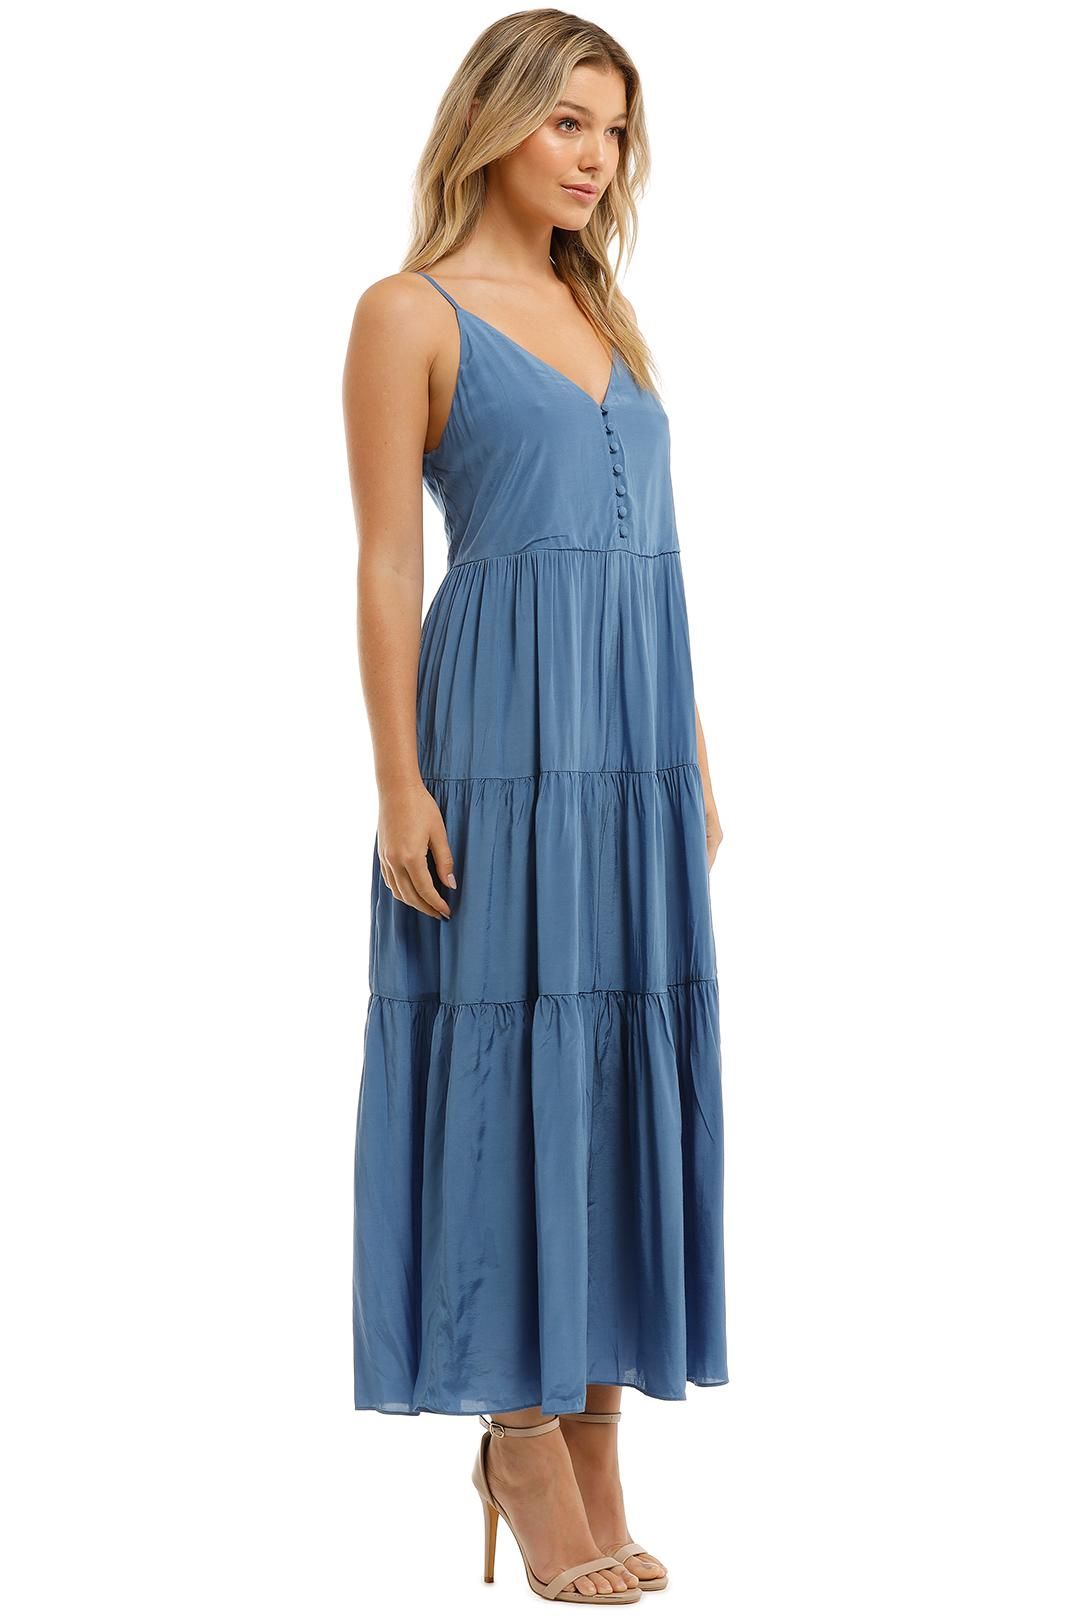 witchery Tiered Button Front Dress Blue Maxi